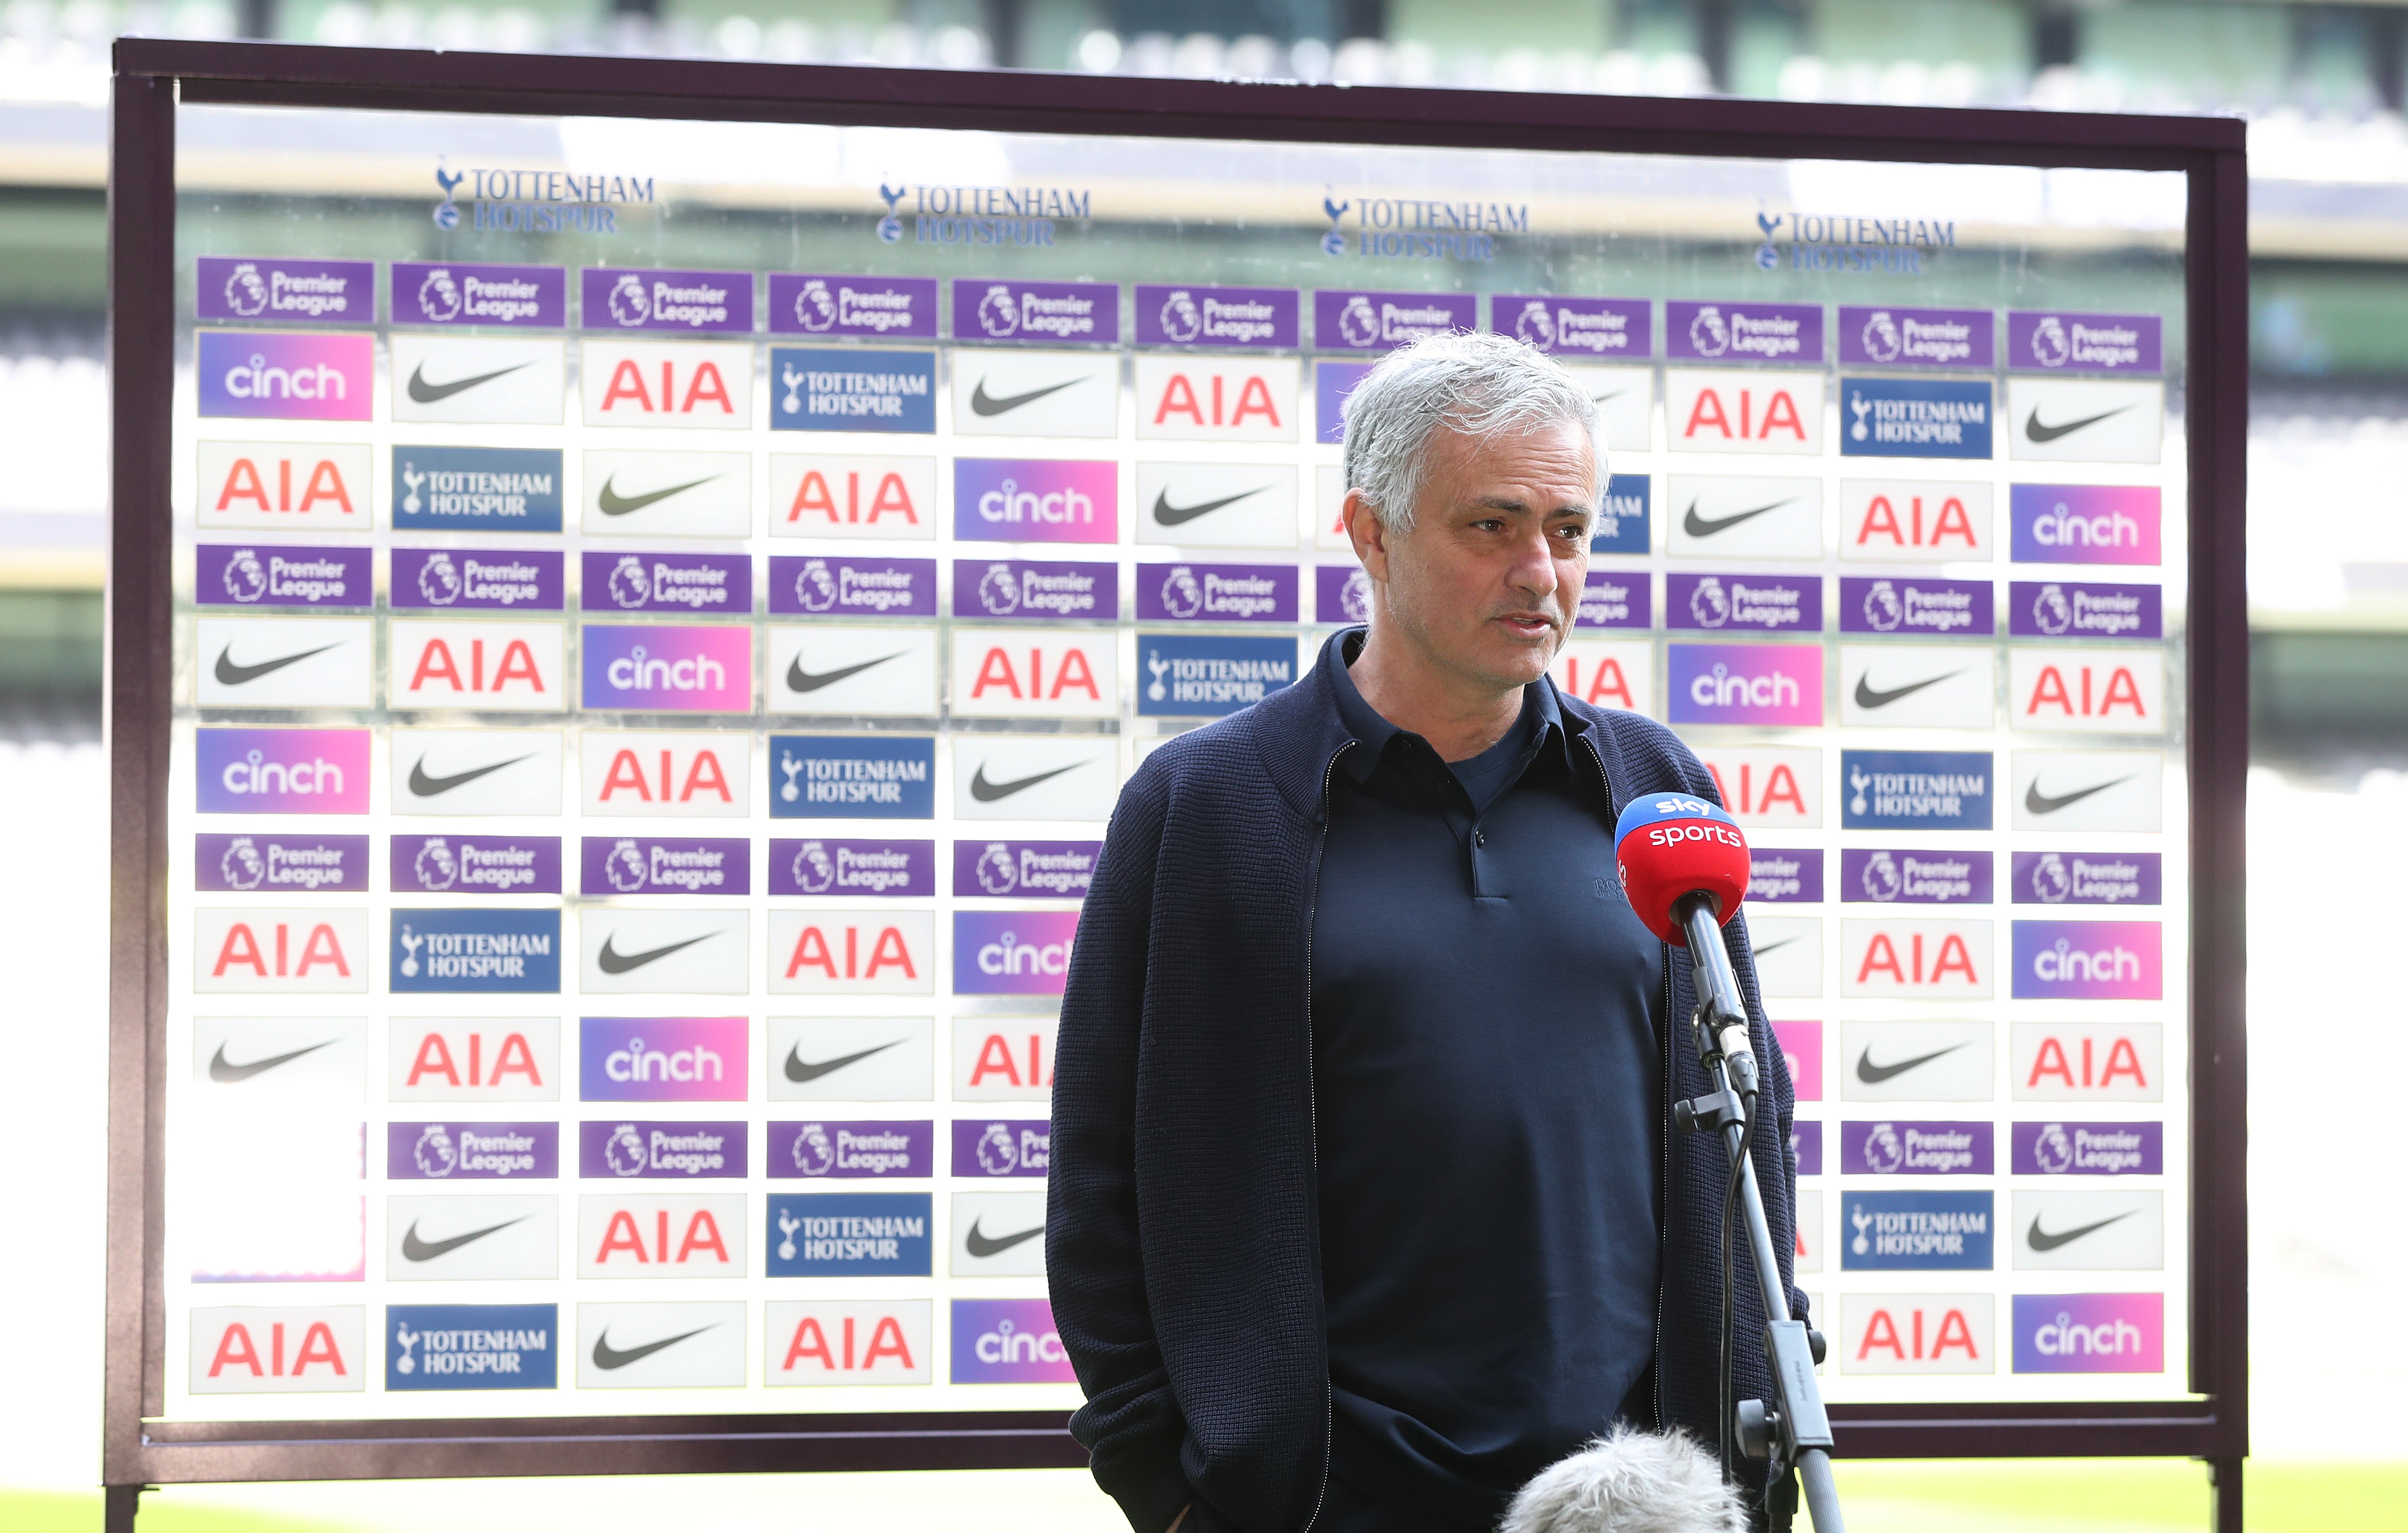 Tottenham Hotspur manager Jose Mourinho refused to go into details on his club’s form